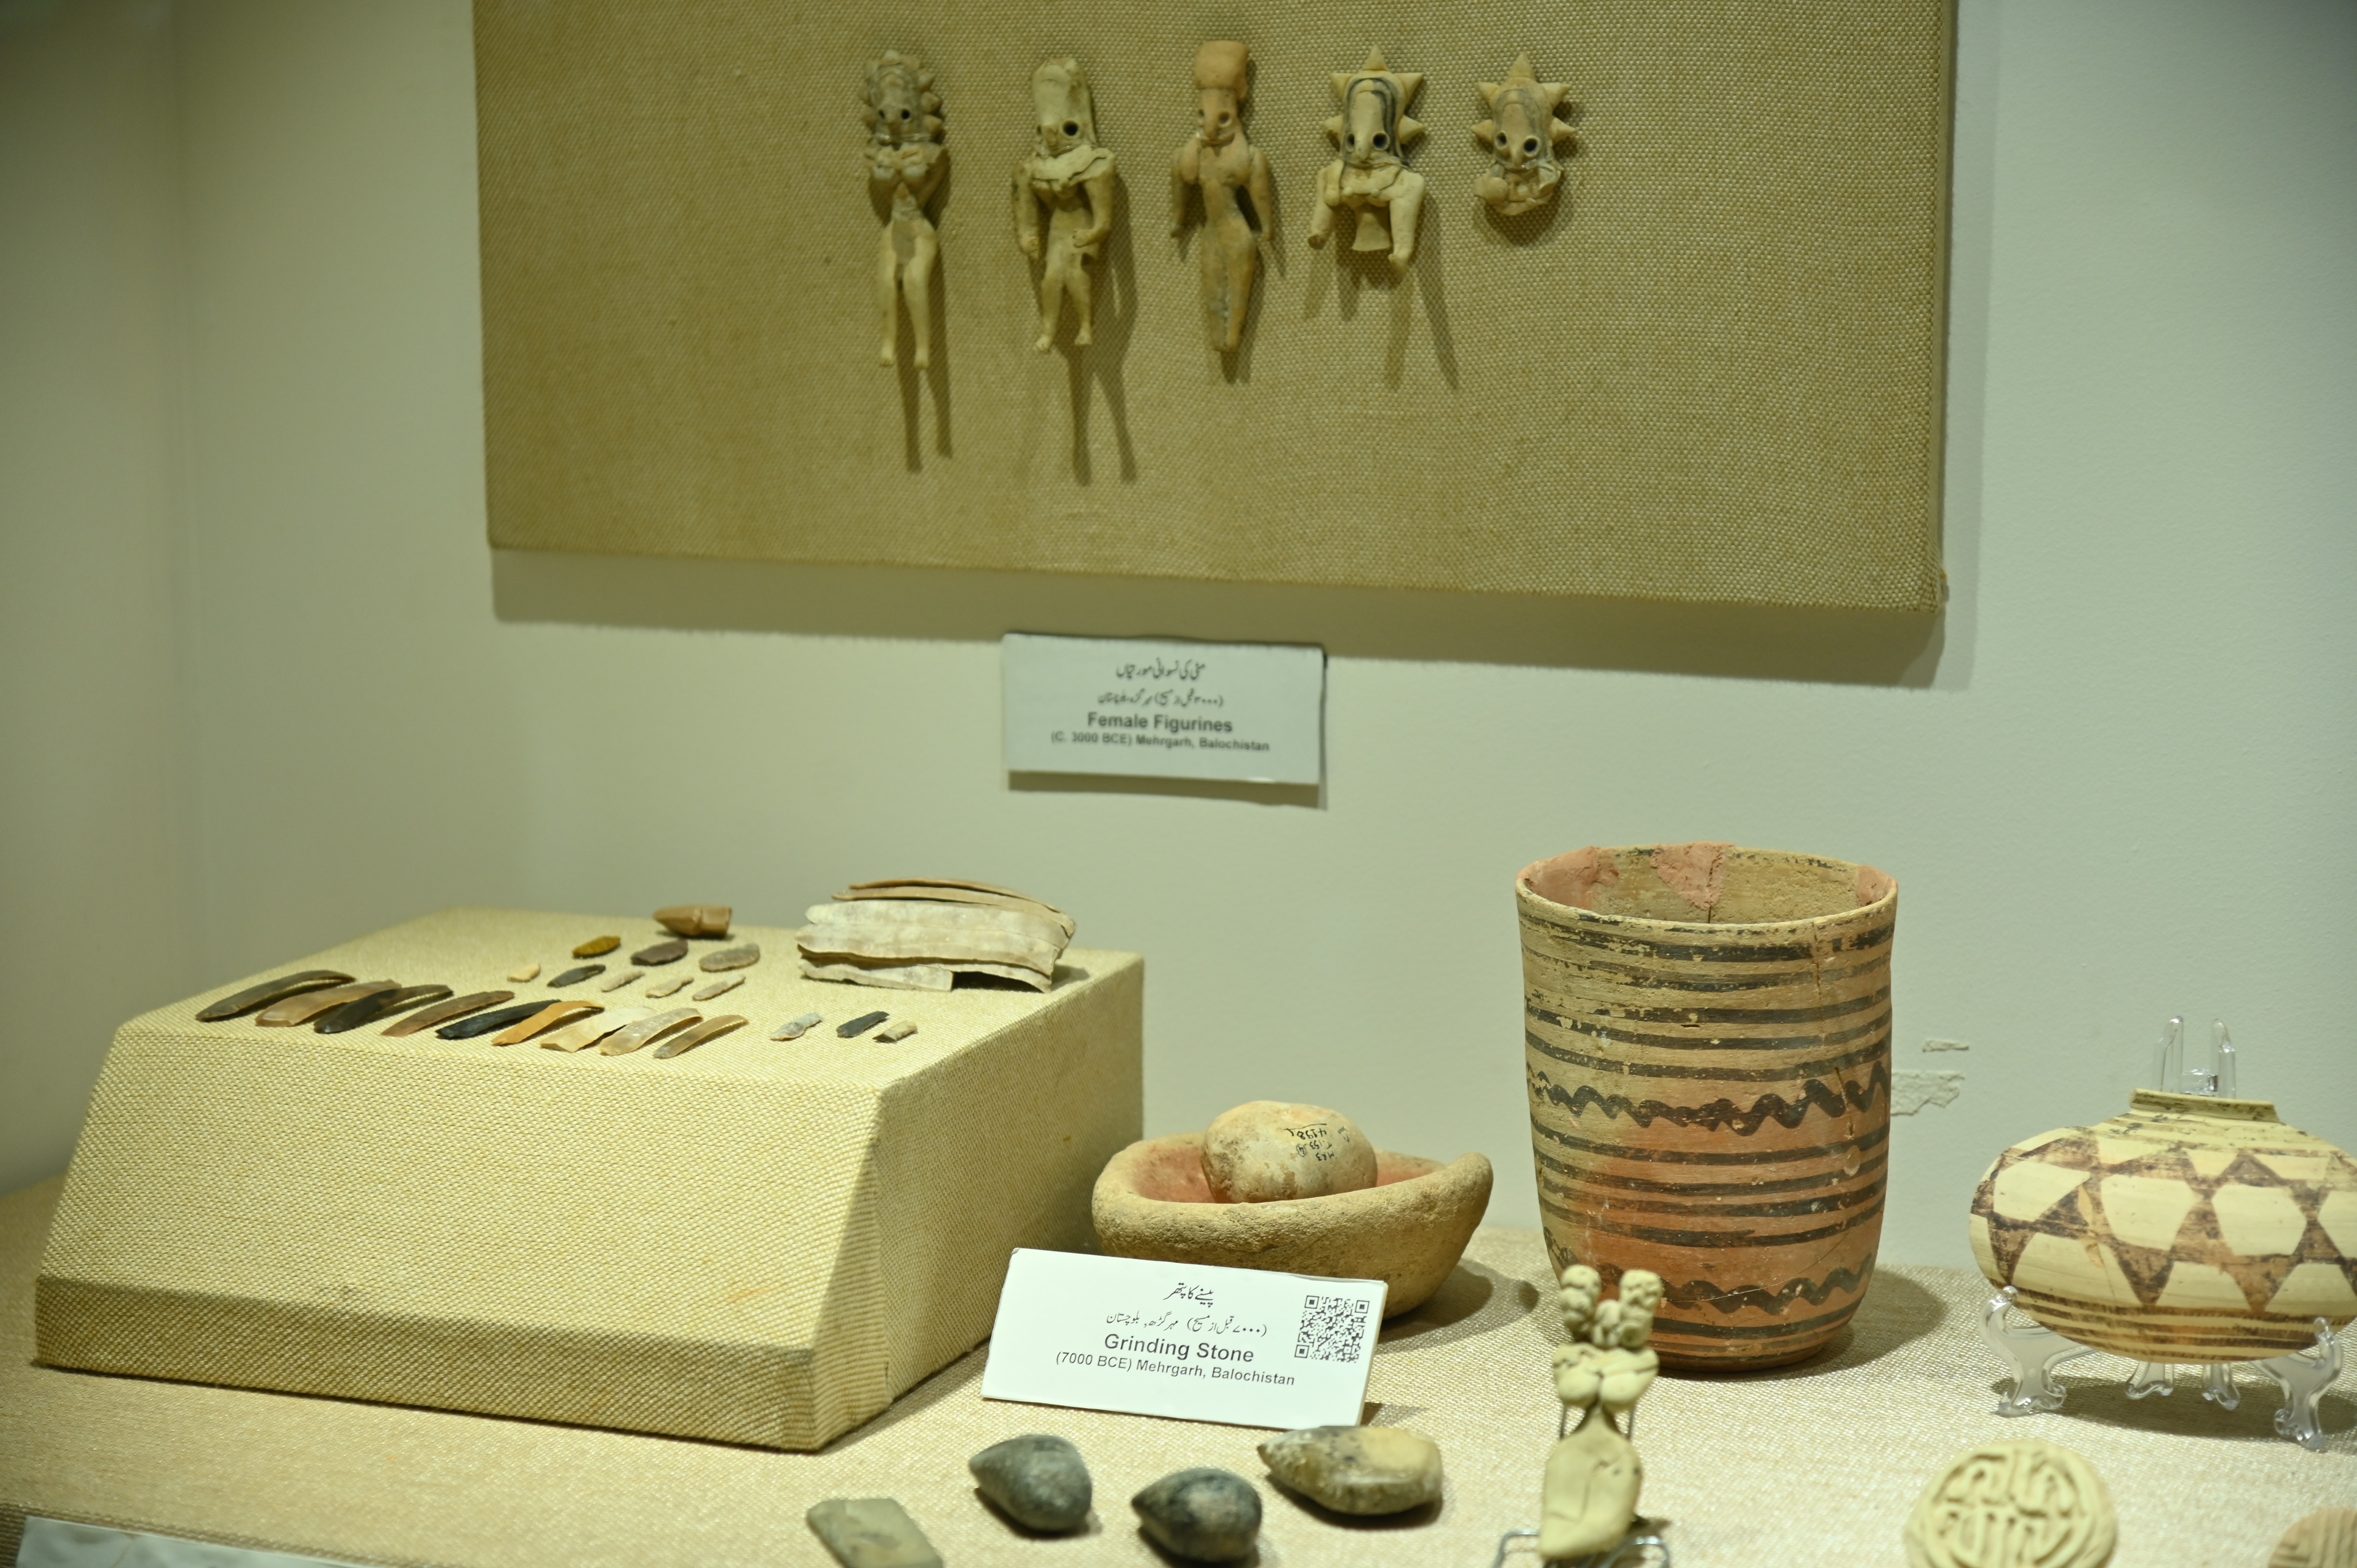 The collection of grinding stones and the female figurines